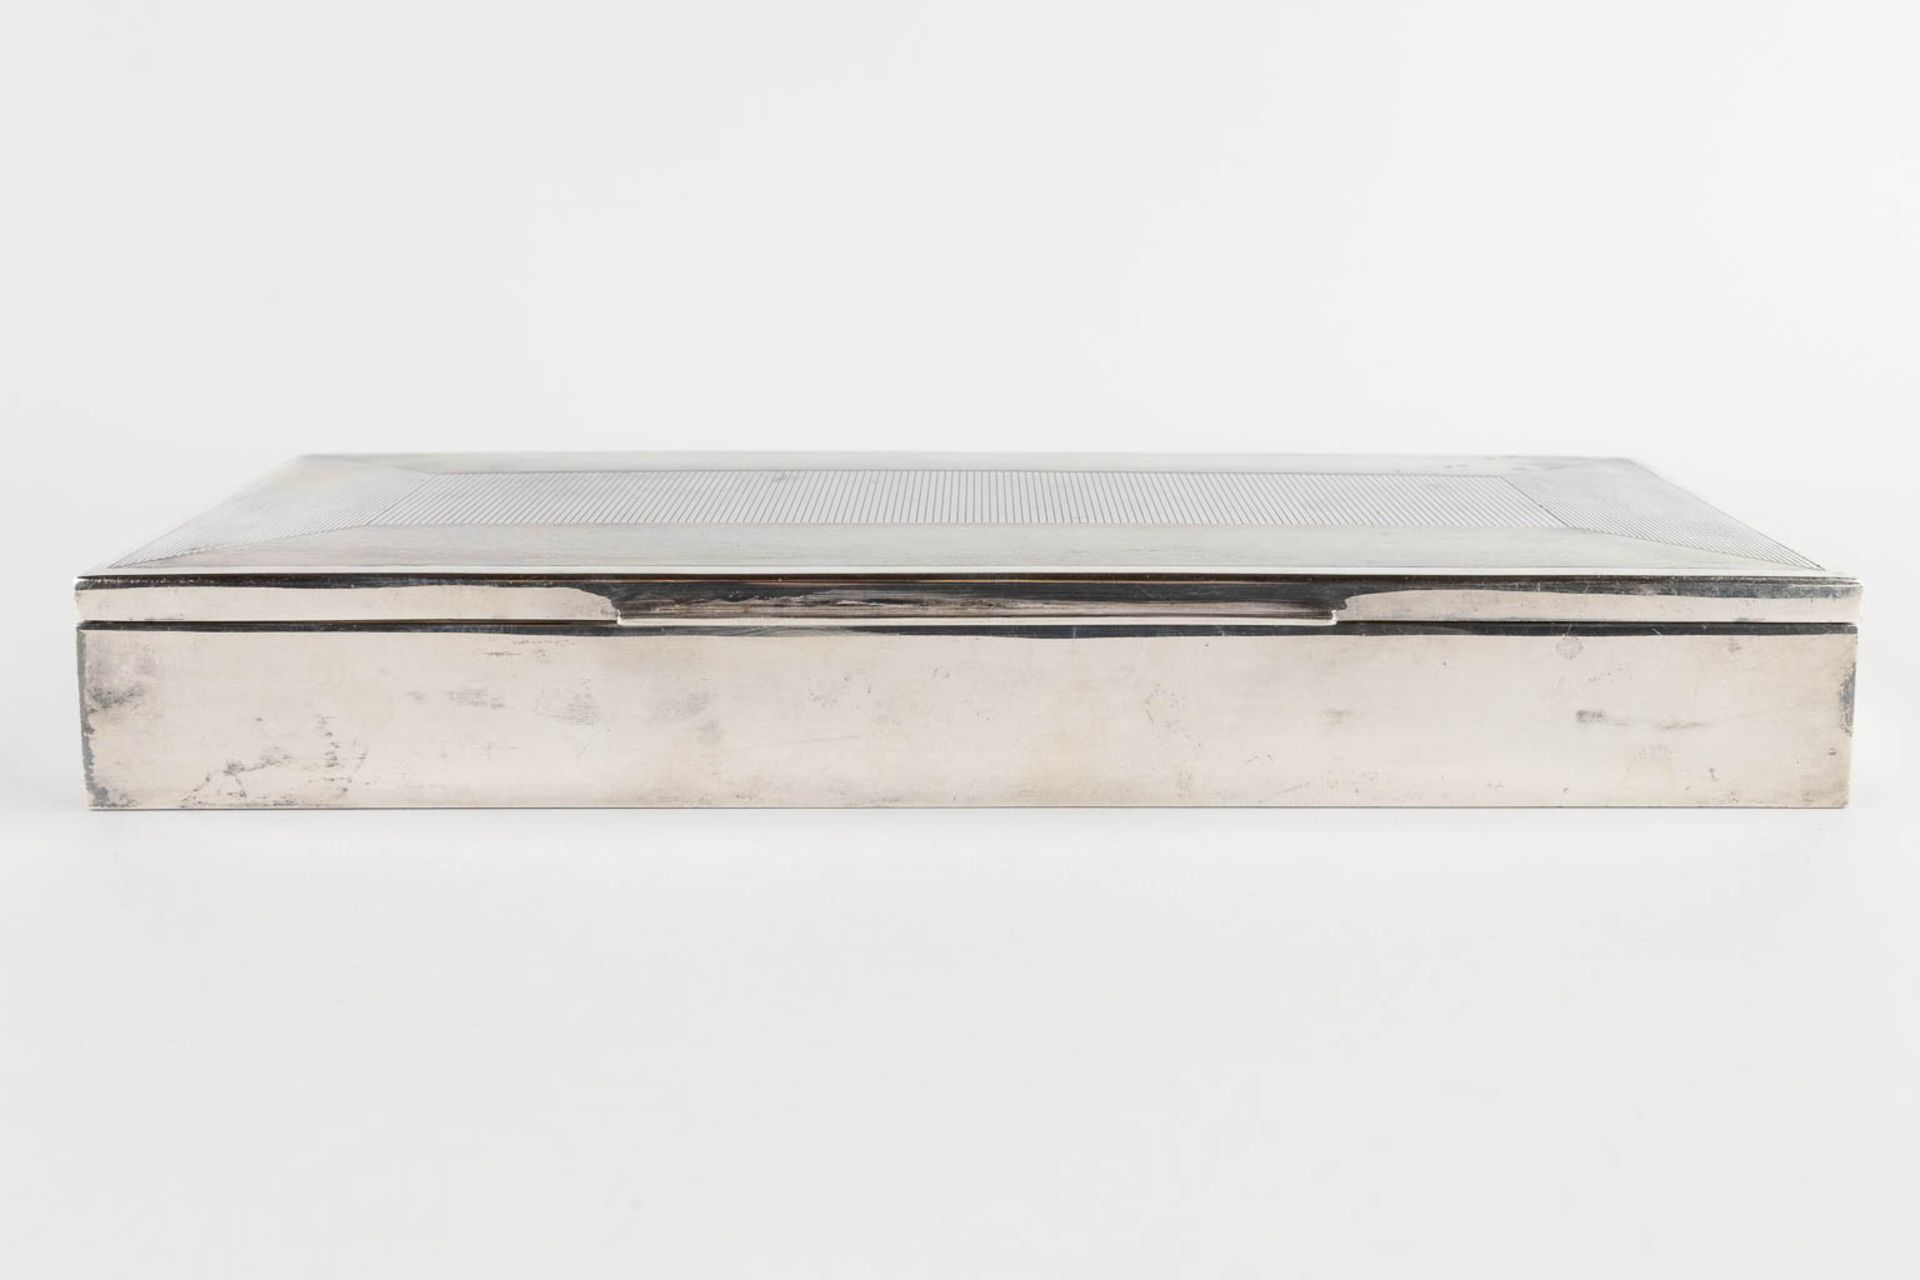 A storage box, silver and wood, Budapest, 835. 20th C. 970g. (D:14 x W:30 x H:4,5 cm) - Image 4 of 12